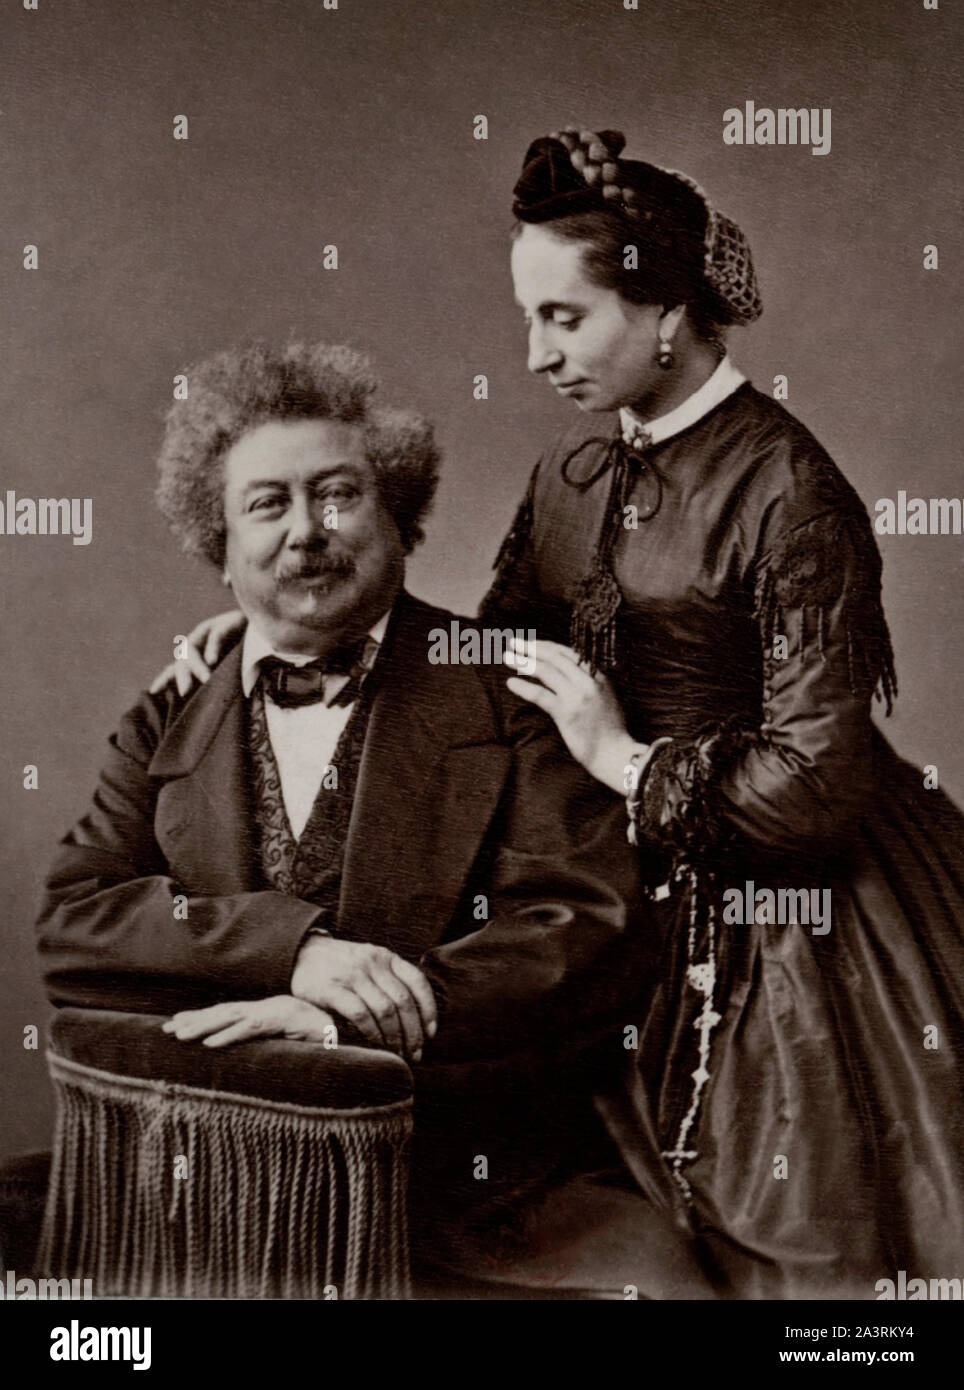 Alexandre Dumas (Dumas Davy de la Pailleterie, 1802 – 1870) also known as Alexandre  Dumas père (father), was a French writer. His works have been tran Stock  Photo - Alamy